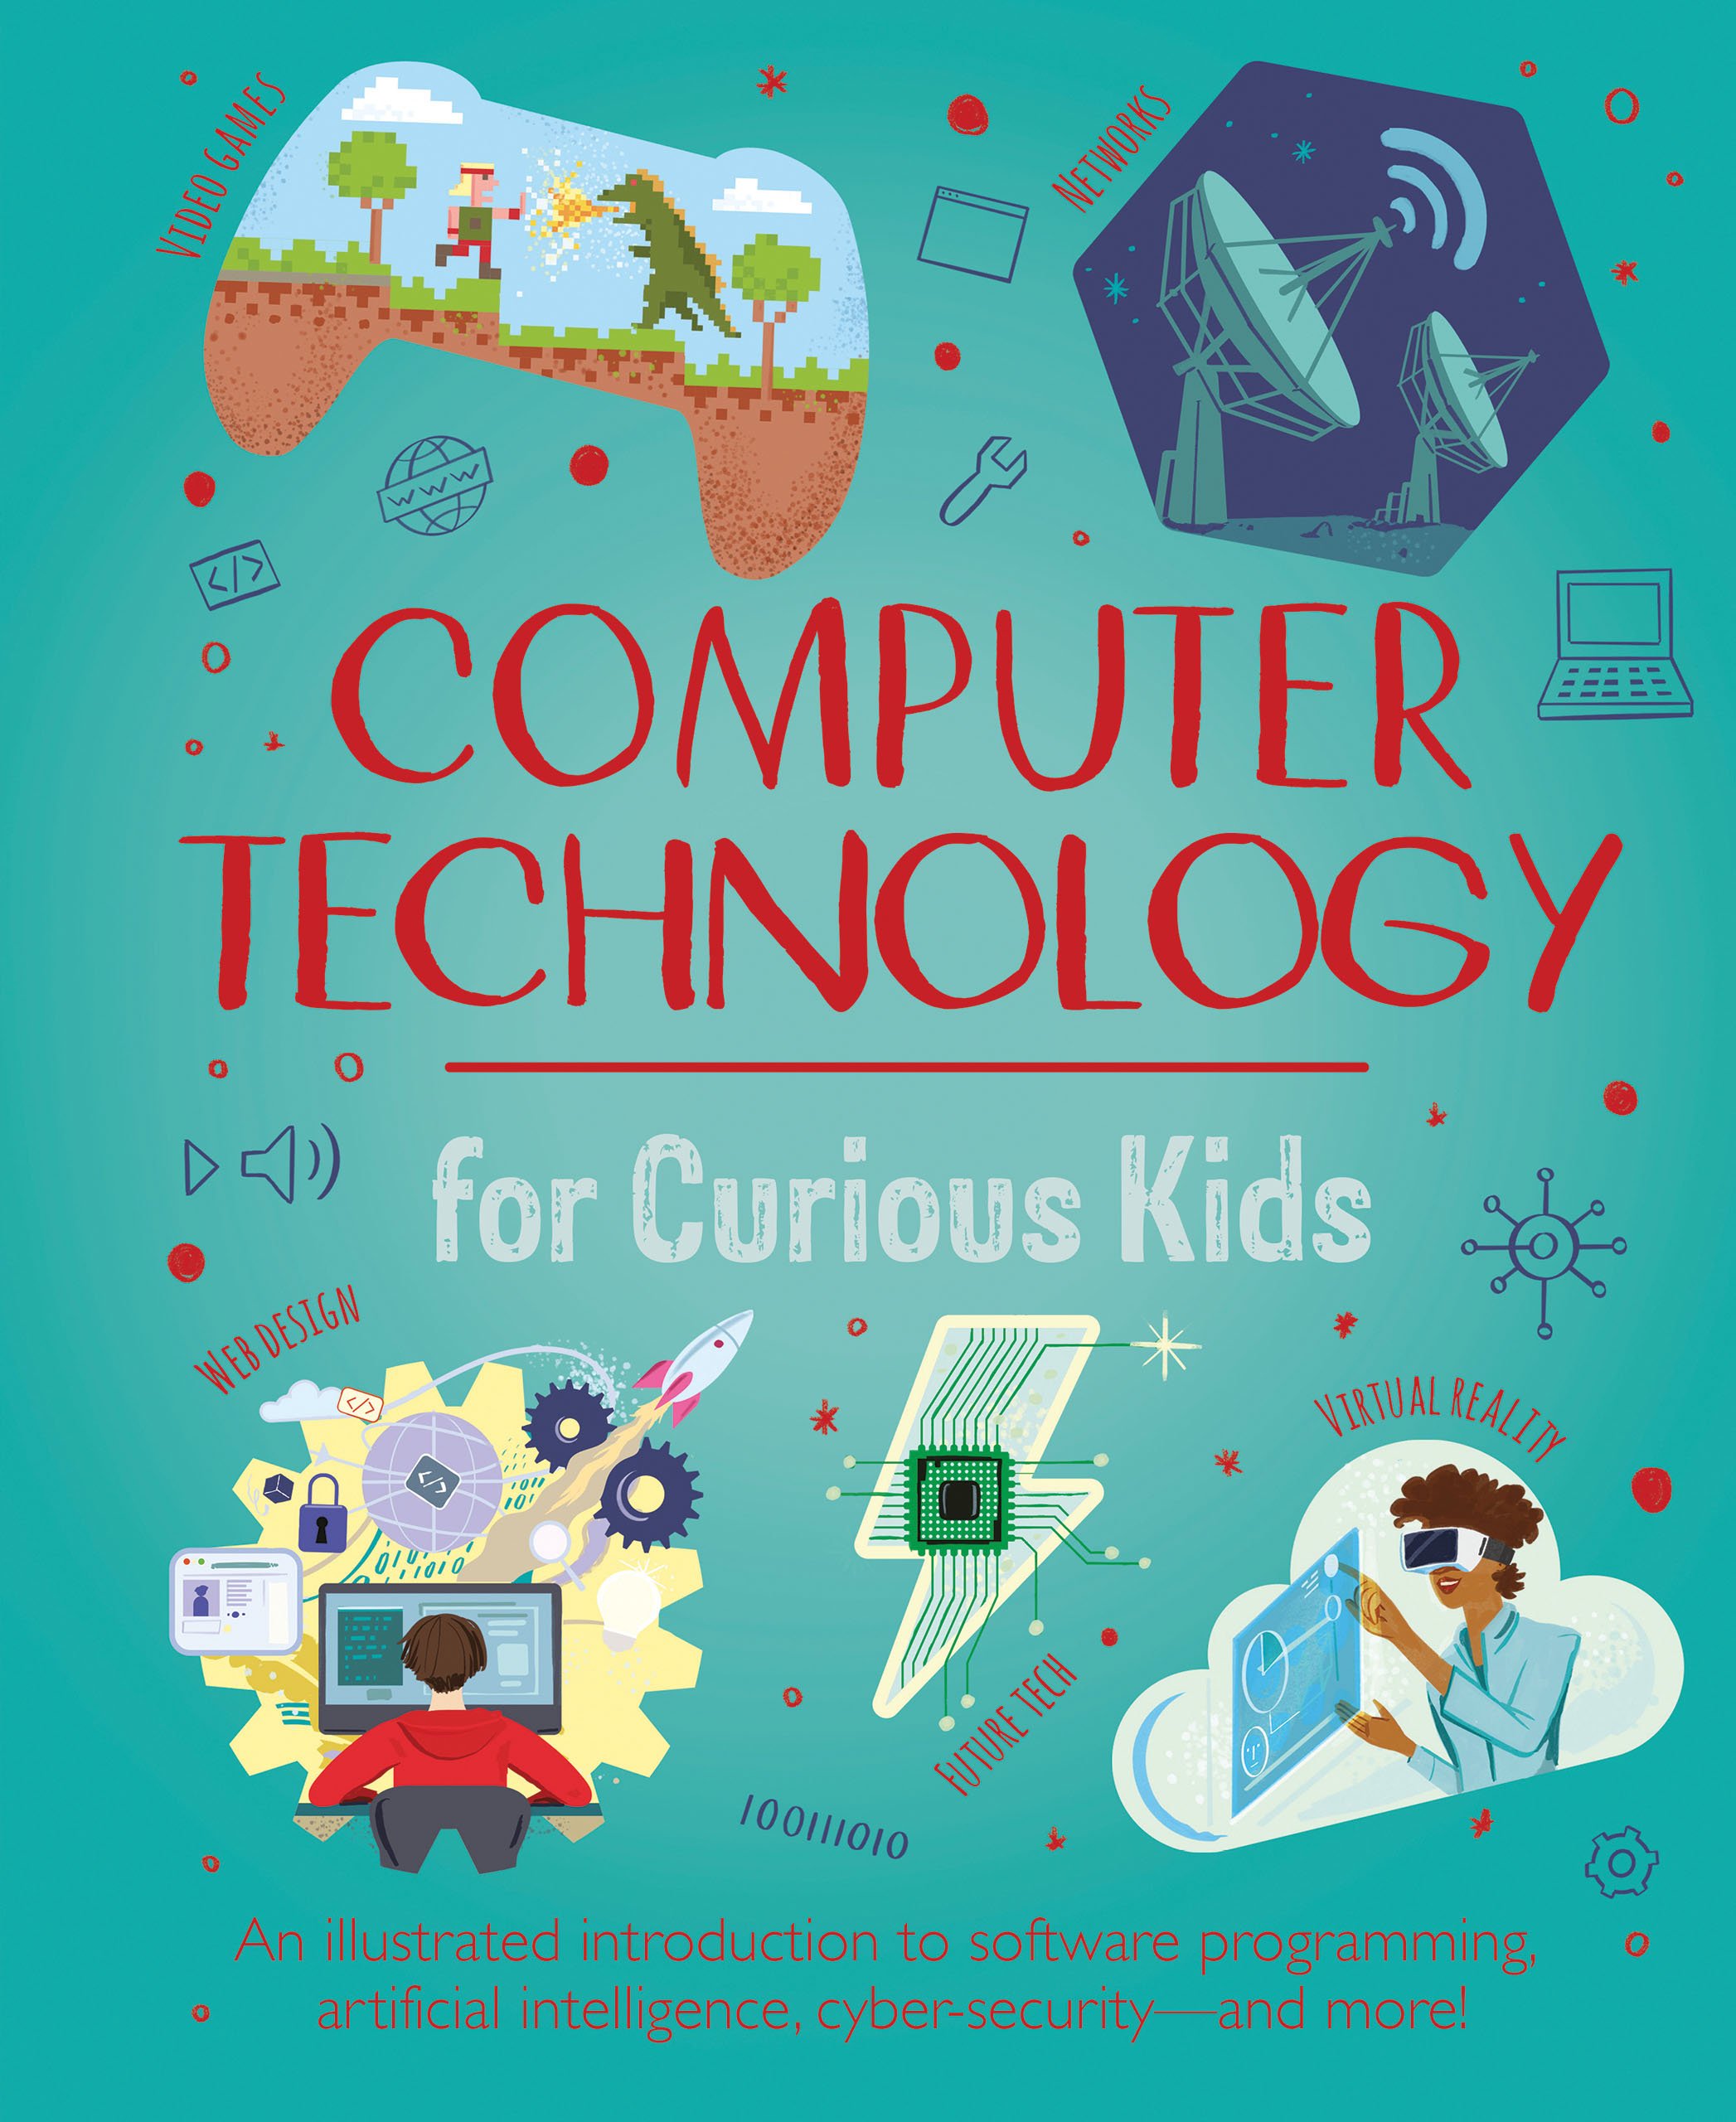 Computer Technology for Curious Kids by CSIRO